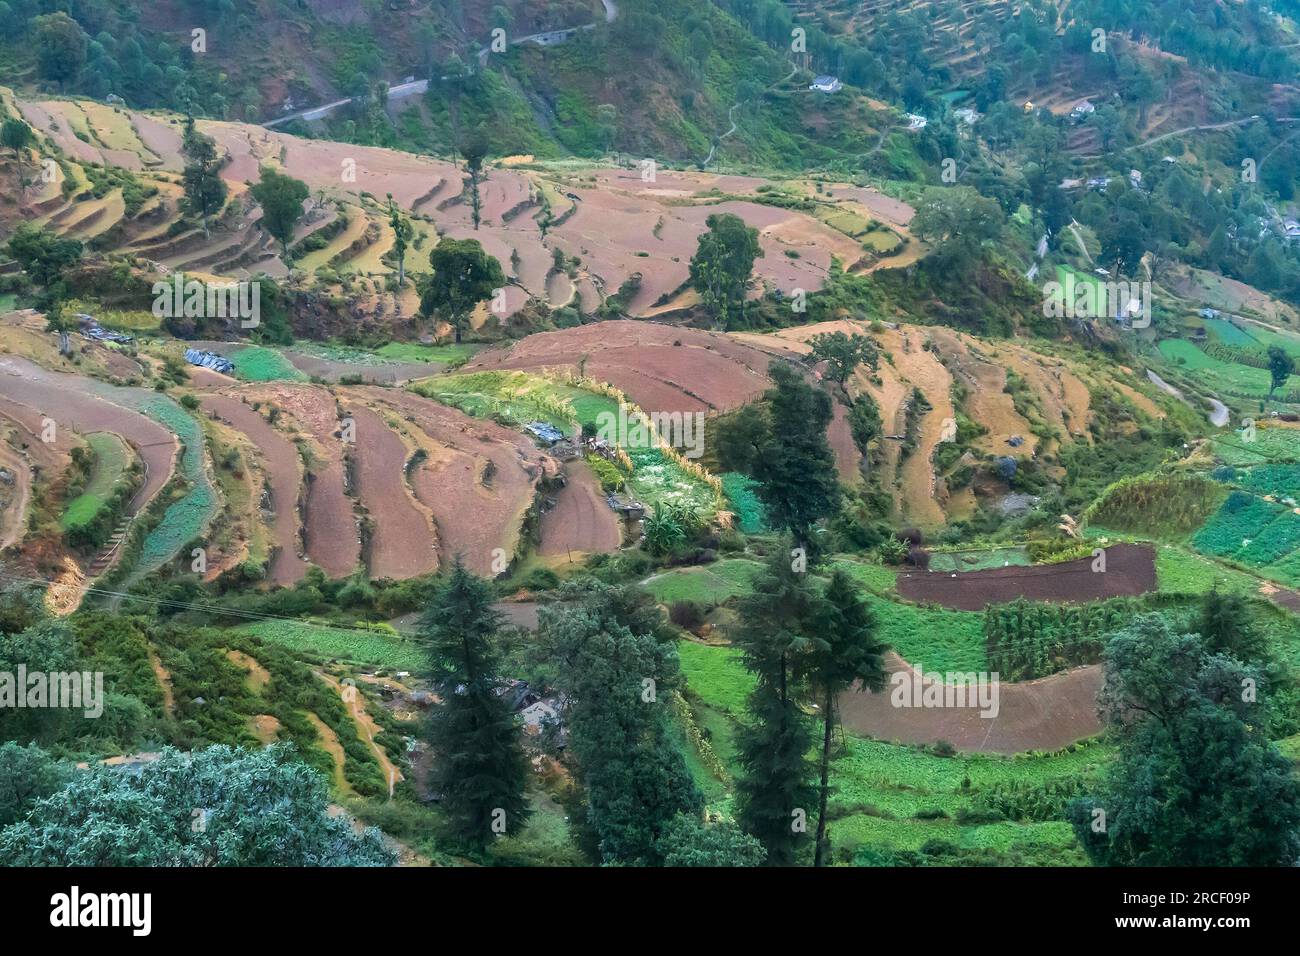 Step agriculture, or terrace agriculture. Steep hills or mountainsides are cut to form level areas of arable land. The areas of flat ground is used. Stock Photo